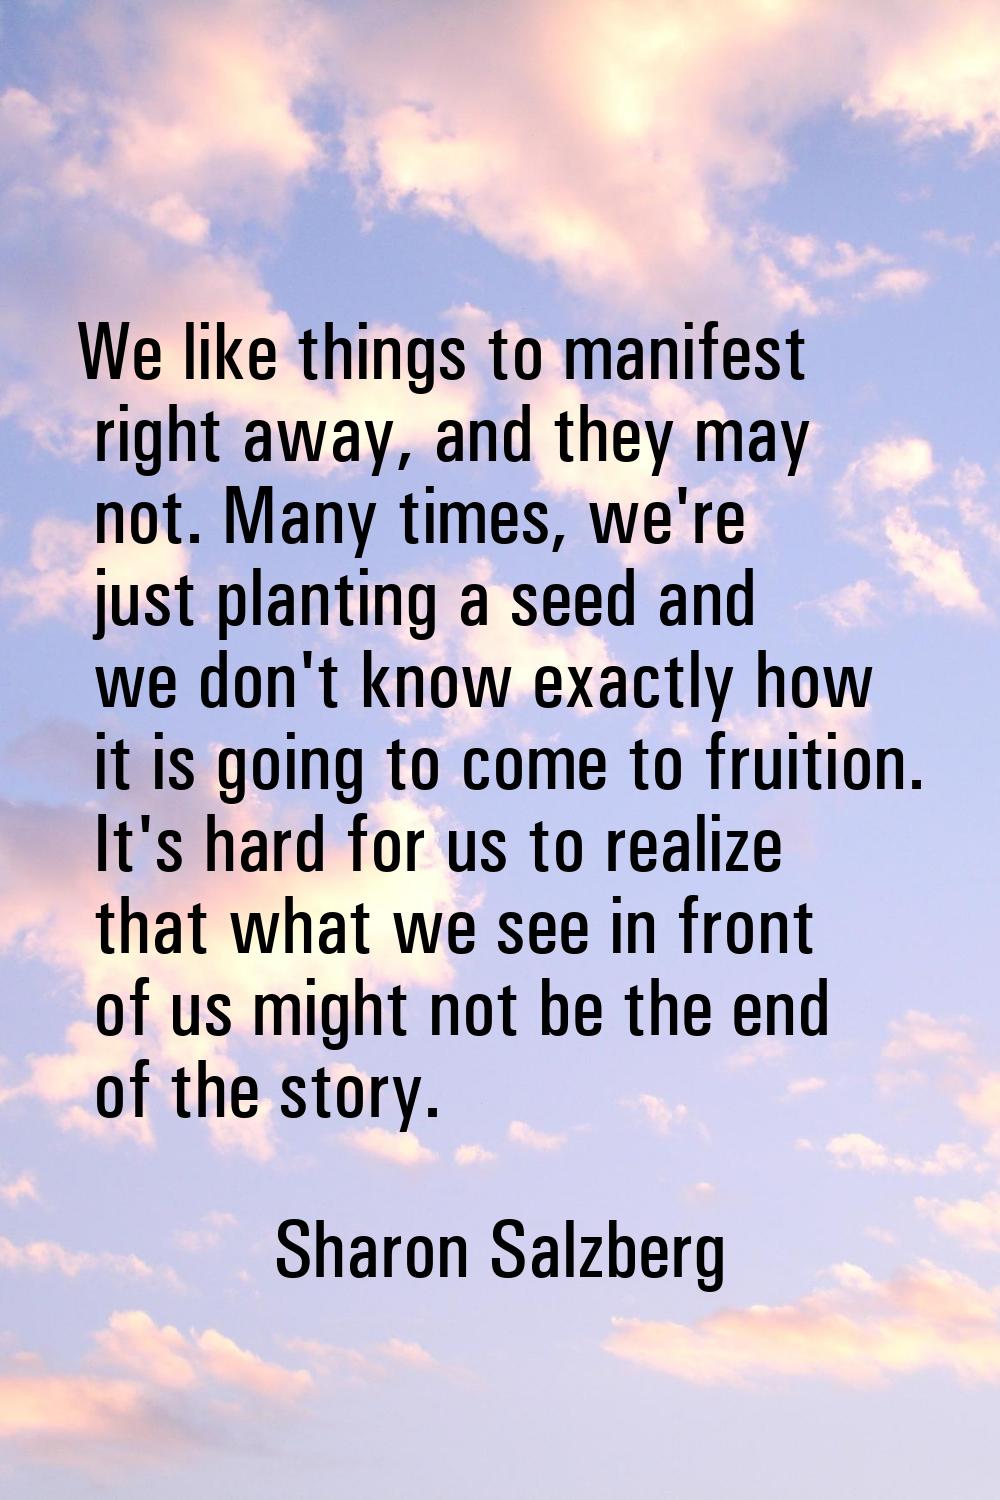 We like things to manifest right away, and they may not. Many times, we're just planting a seed and